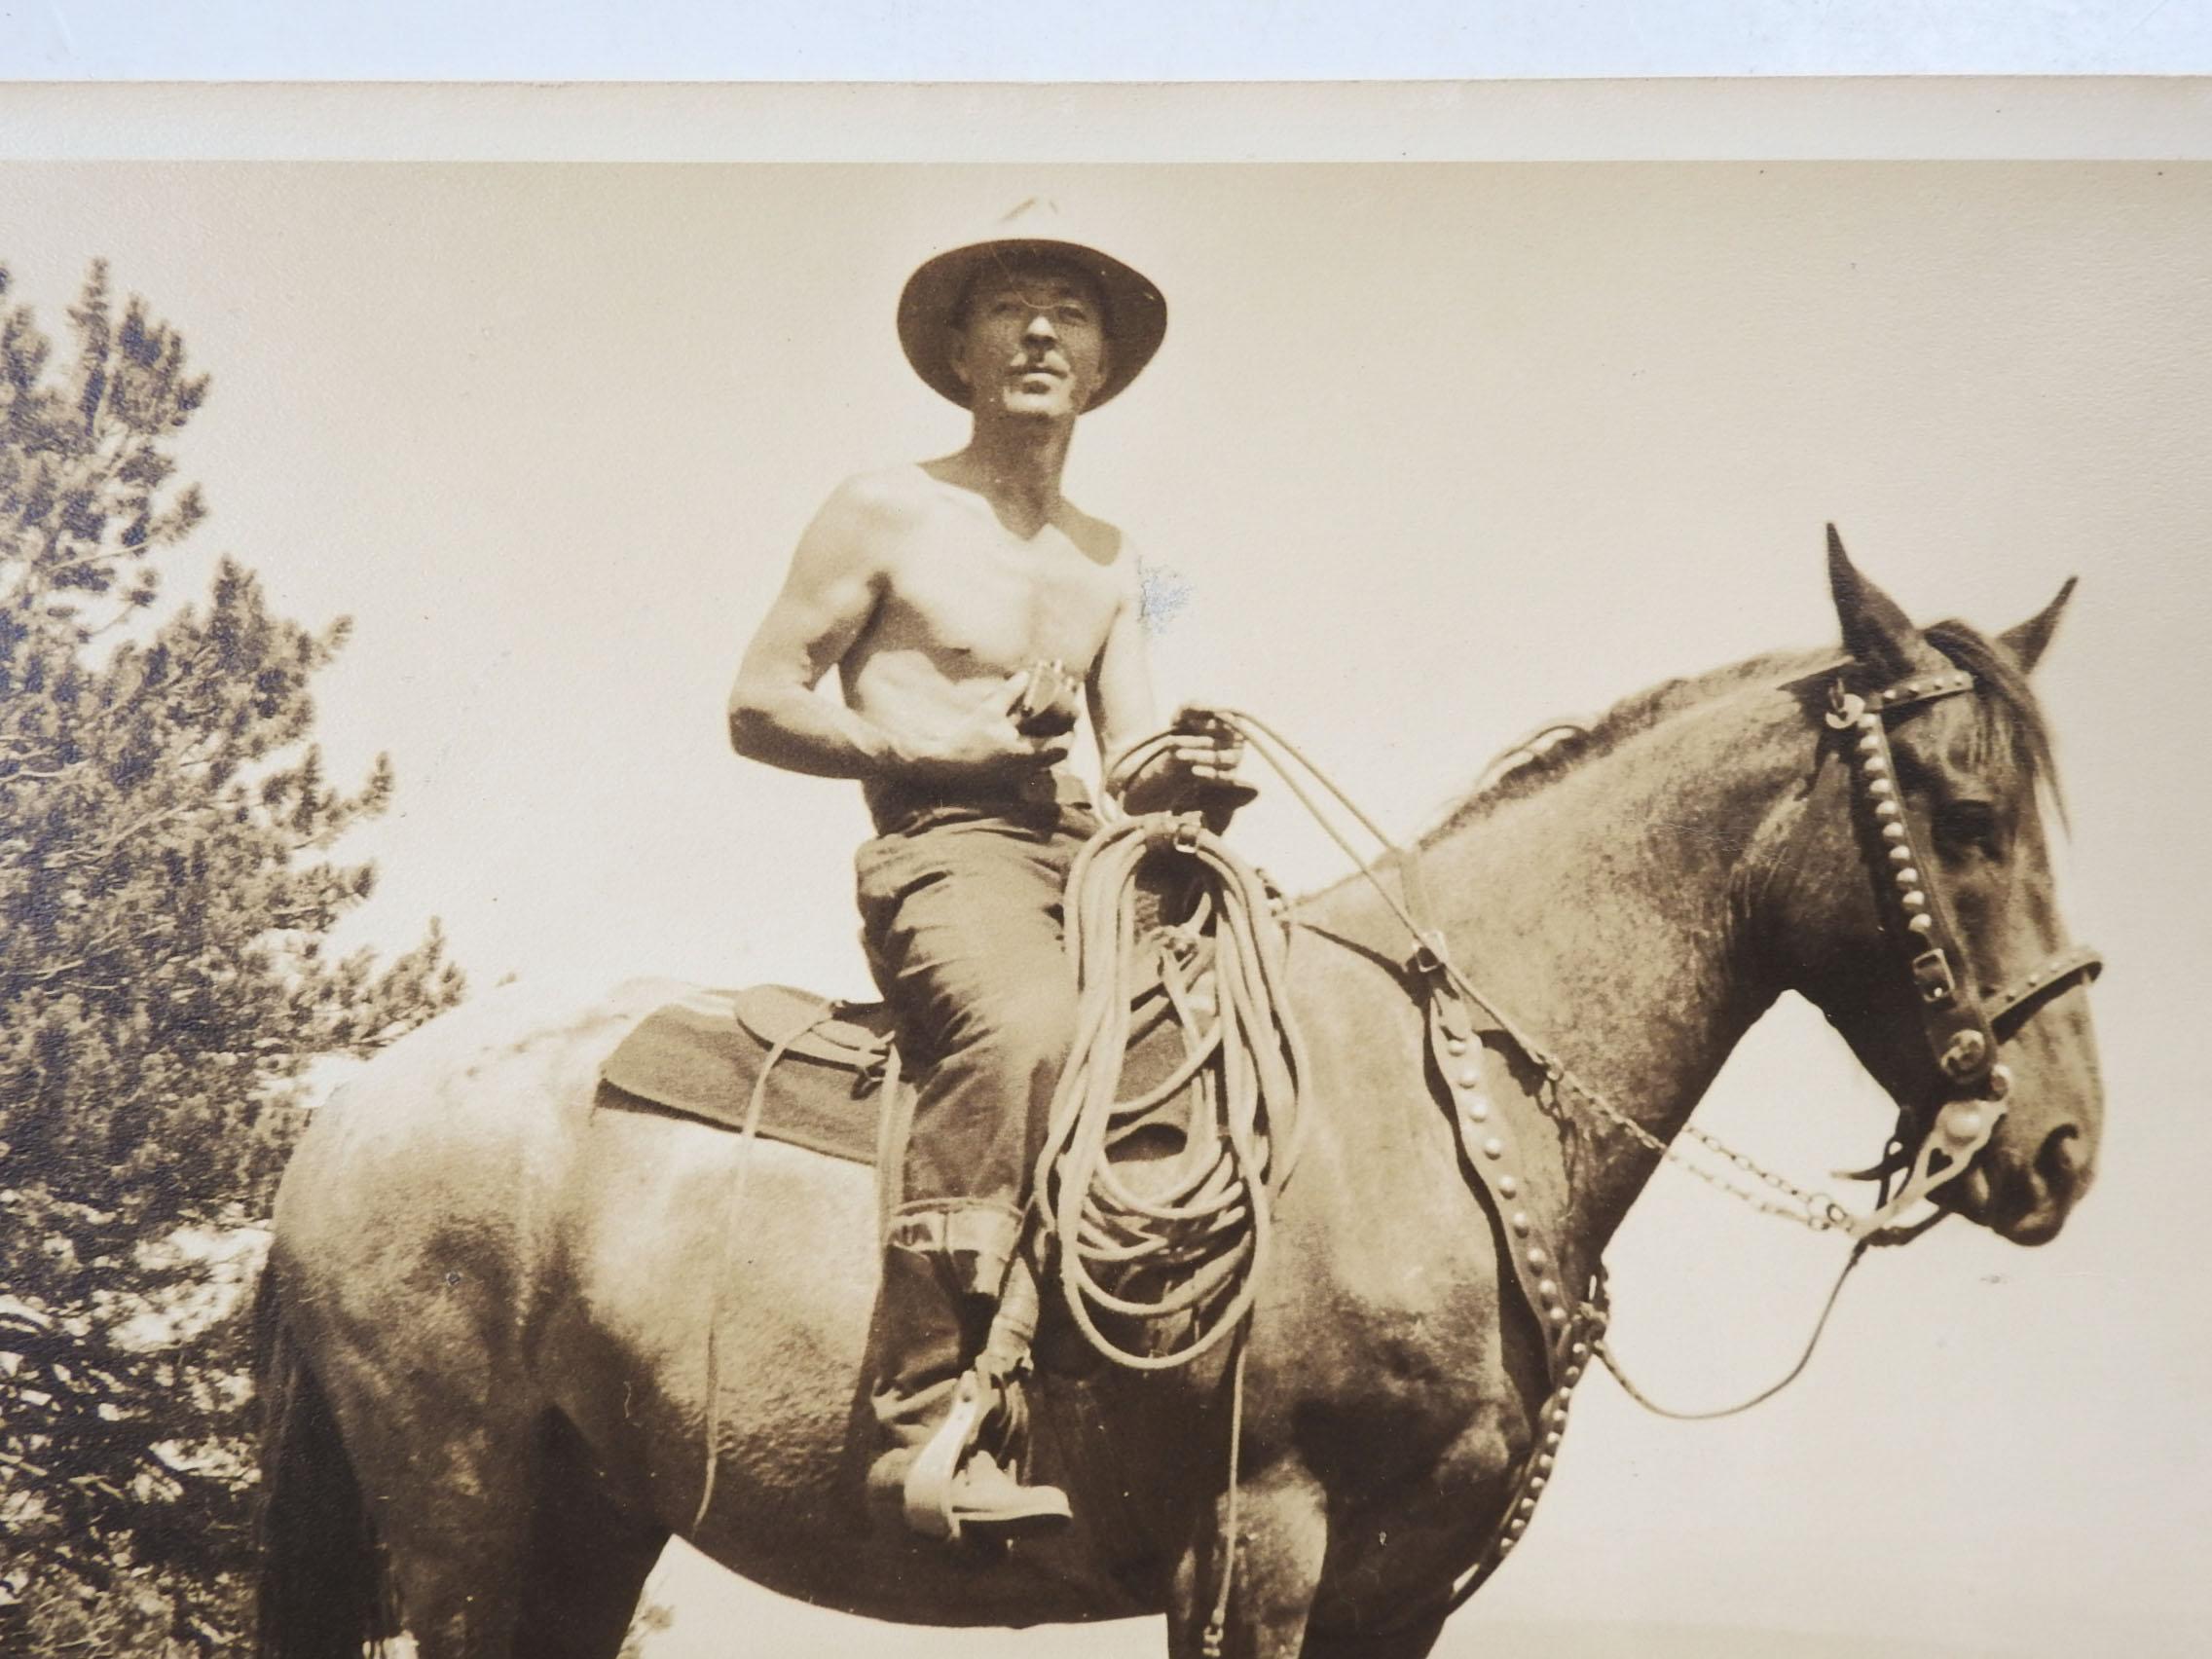 Circa 1940's photograph of man on horseback. Likely California based on the bit and romal reins. Rugged looking fellow without a shirt, possibly holding a camera, hard to tell. Great image, unsigned, unframed.